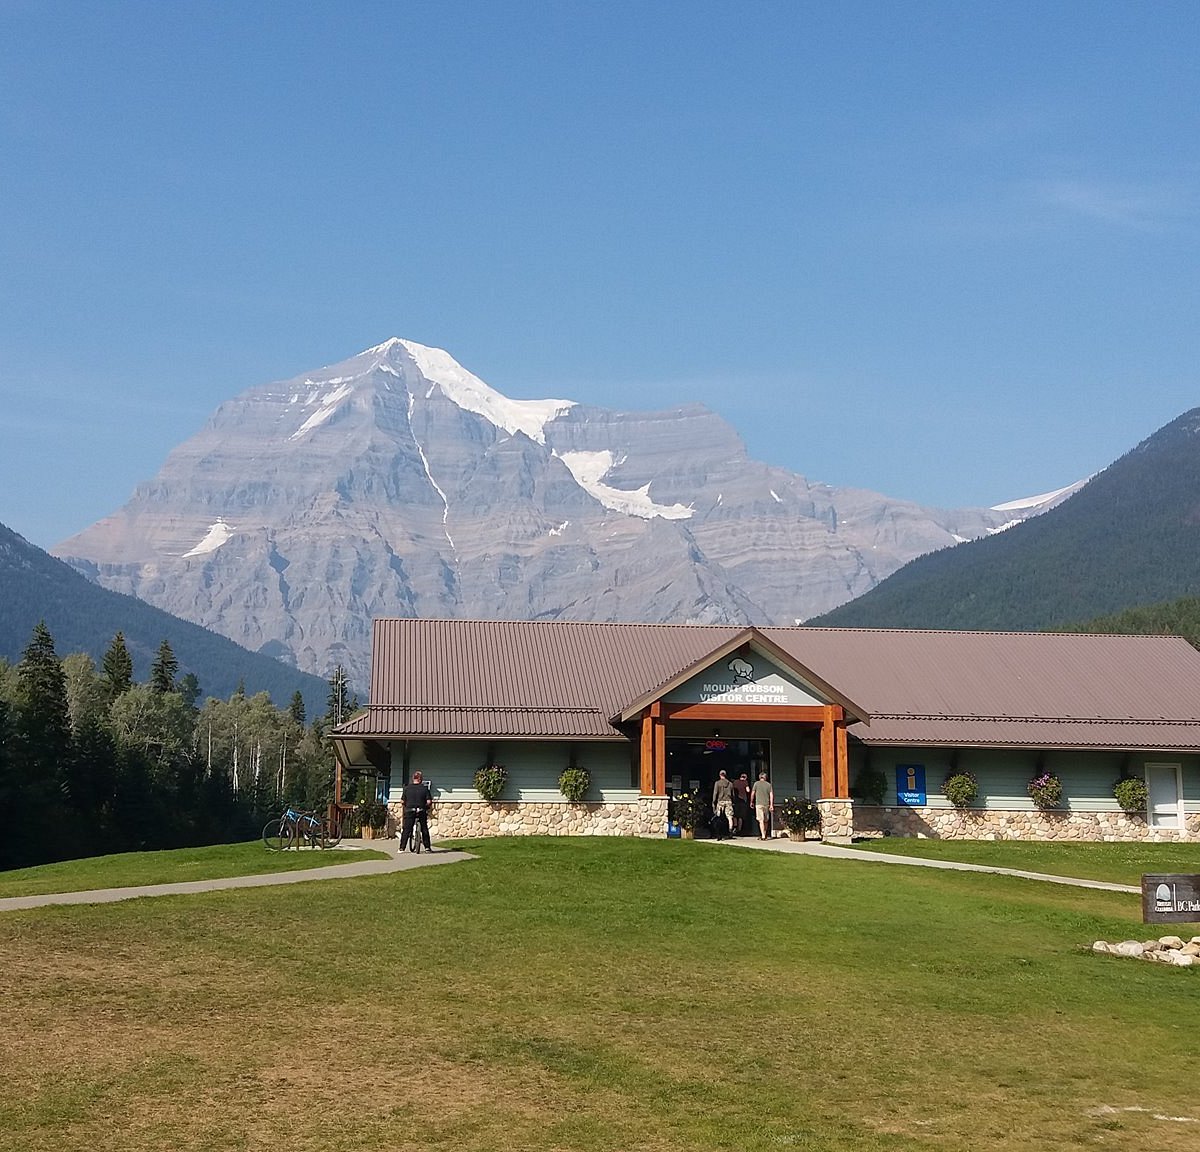 mount robson map